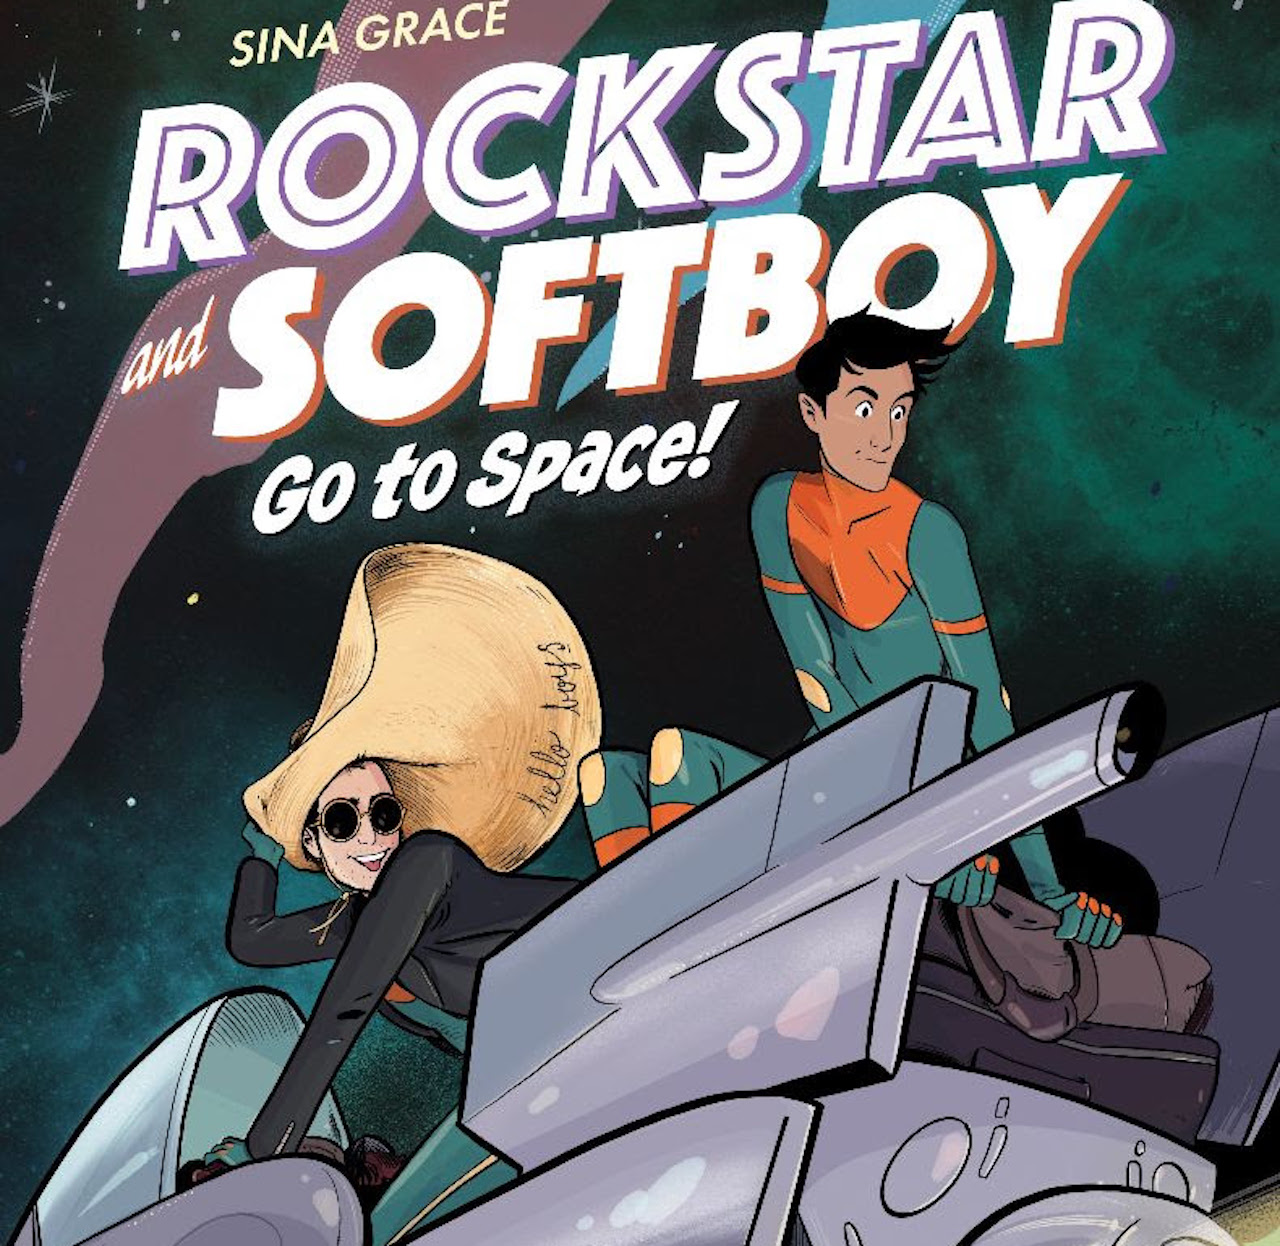 'Rockstar and Softboy: Go to Space' announced for January 2023